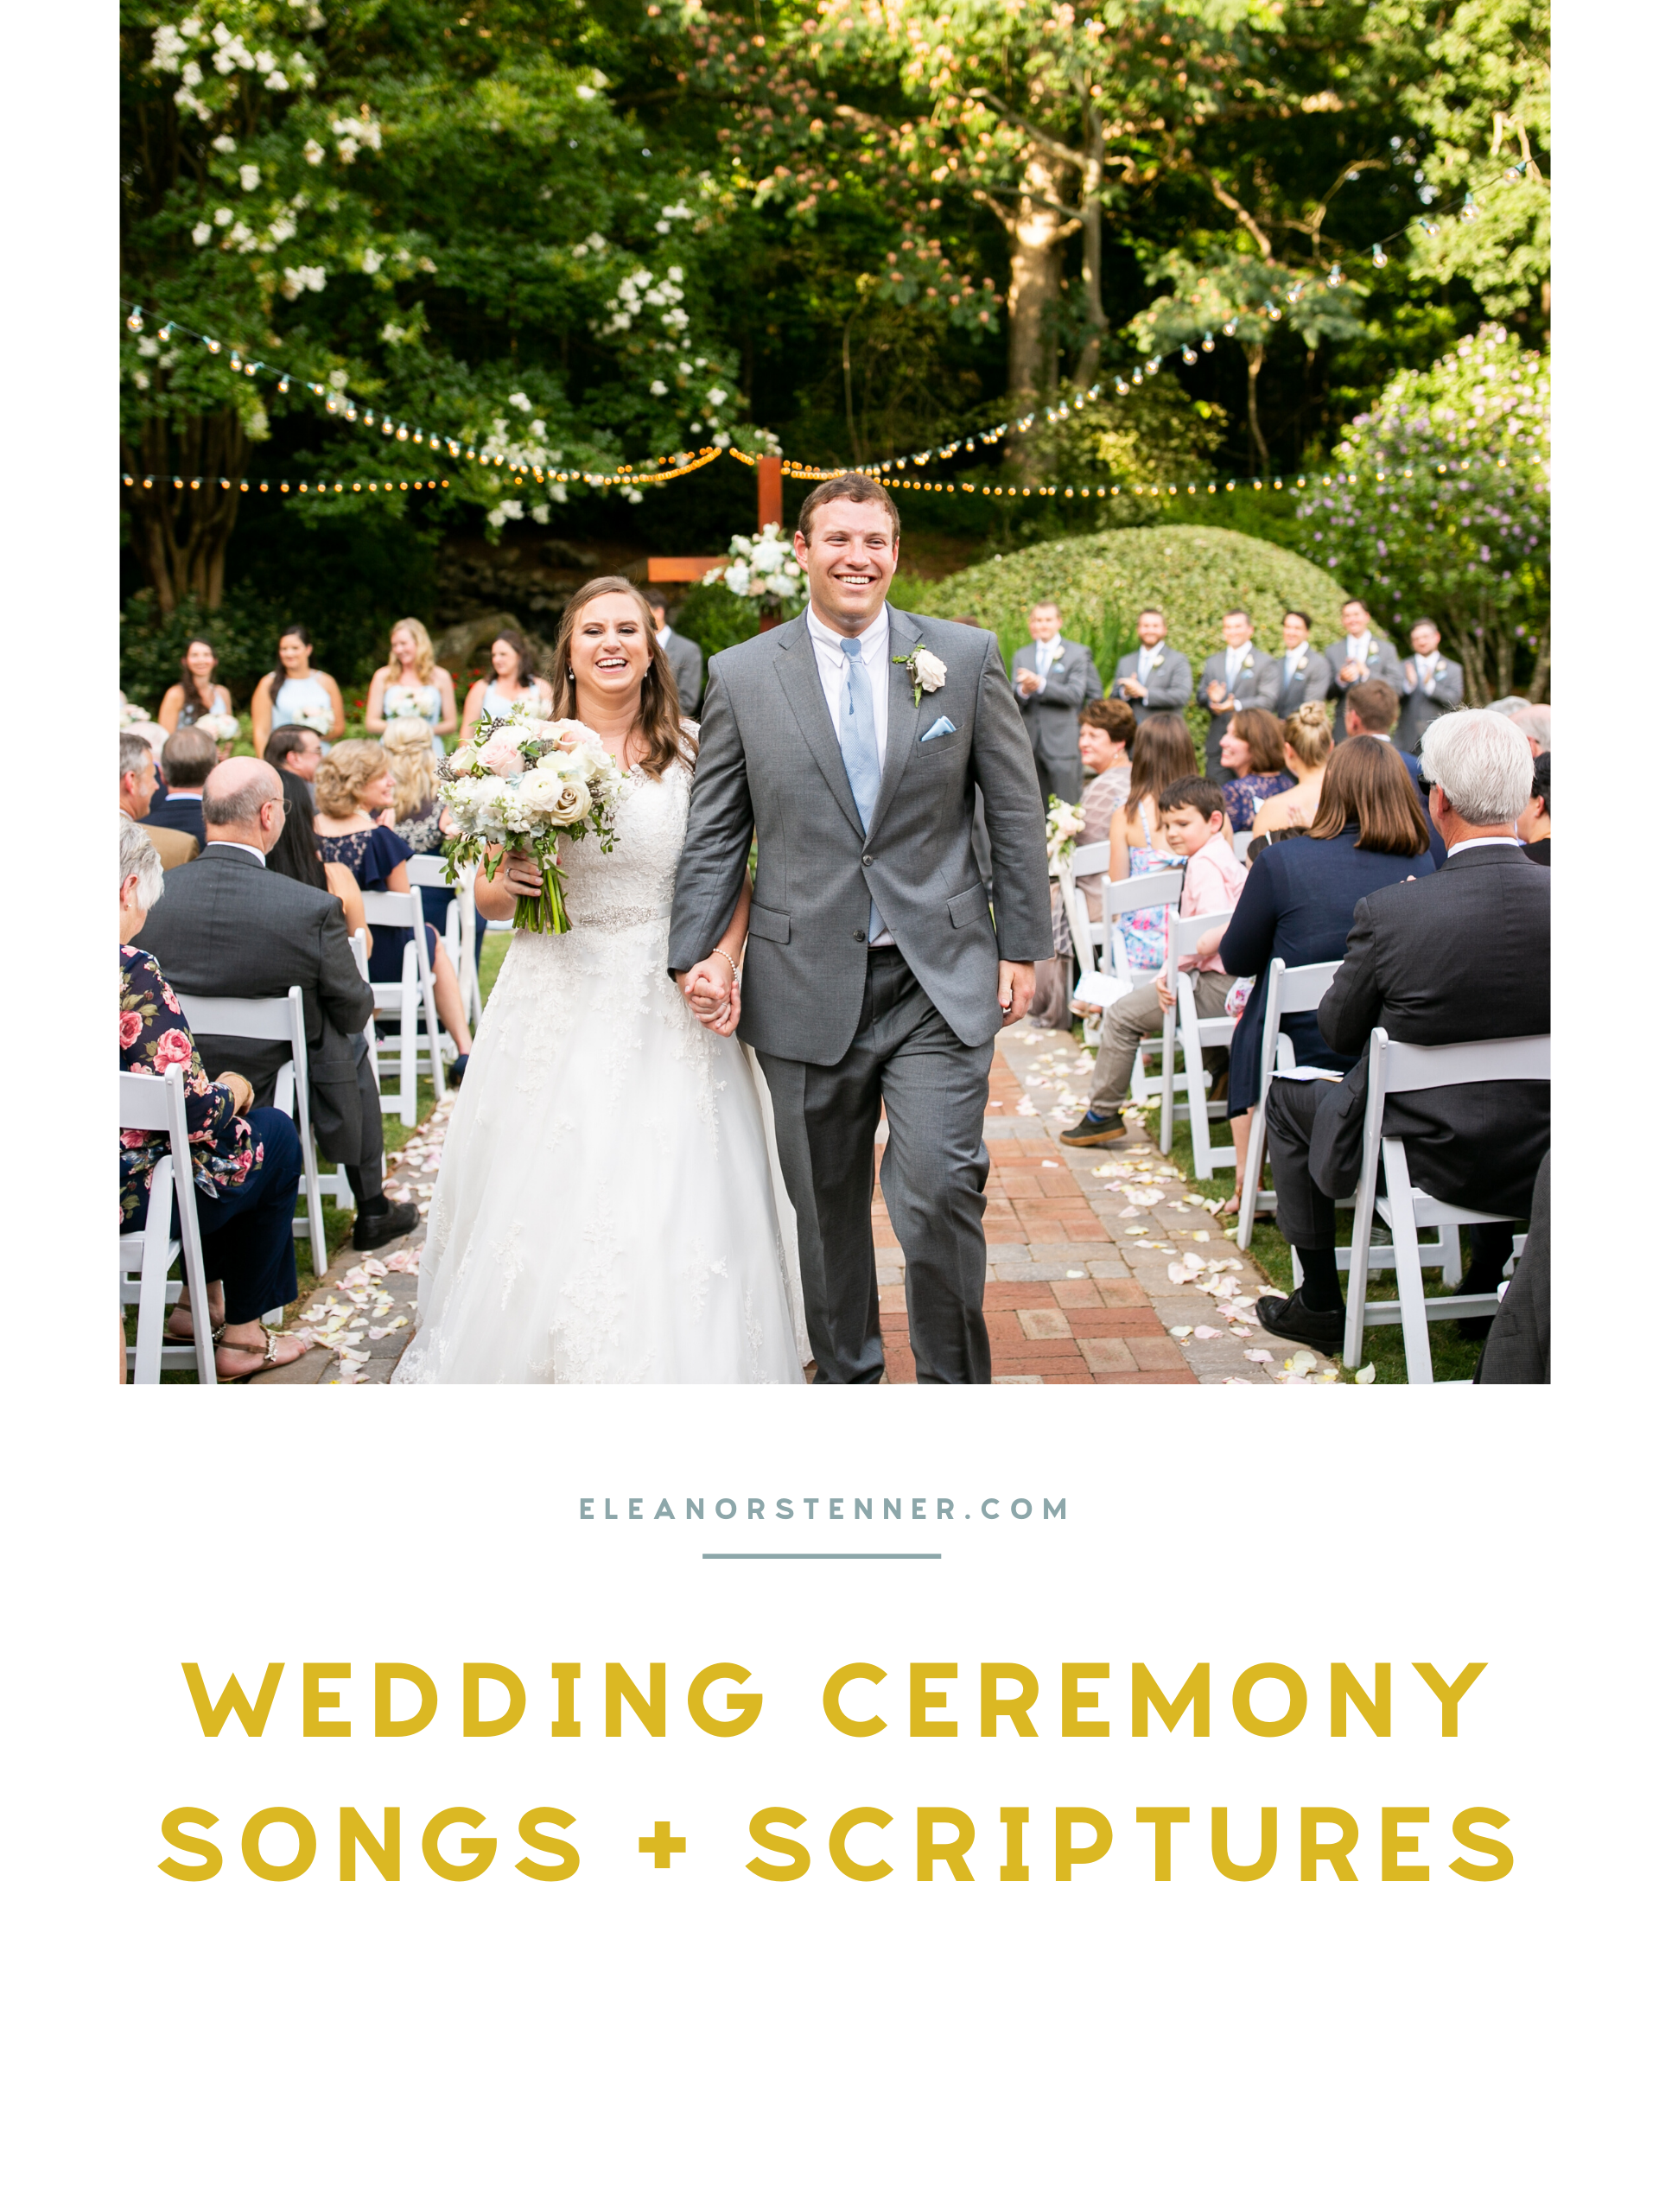 Trying hard to find scriptures and songs to use in your wedding ceremony? Here are time-tested hymns and Bible verses to ground your marriage.